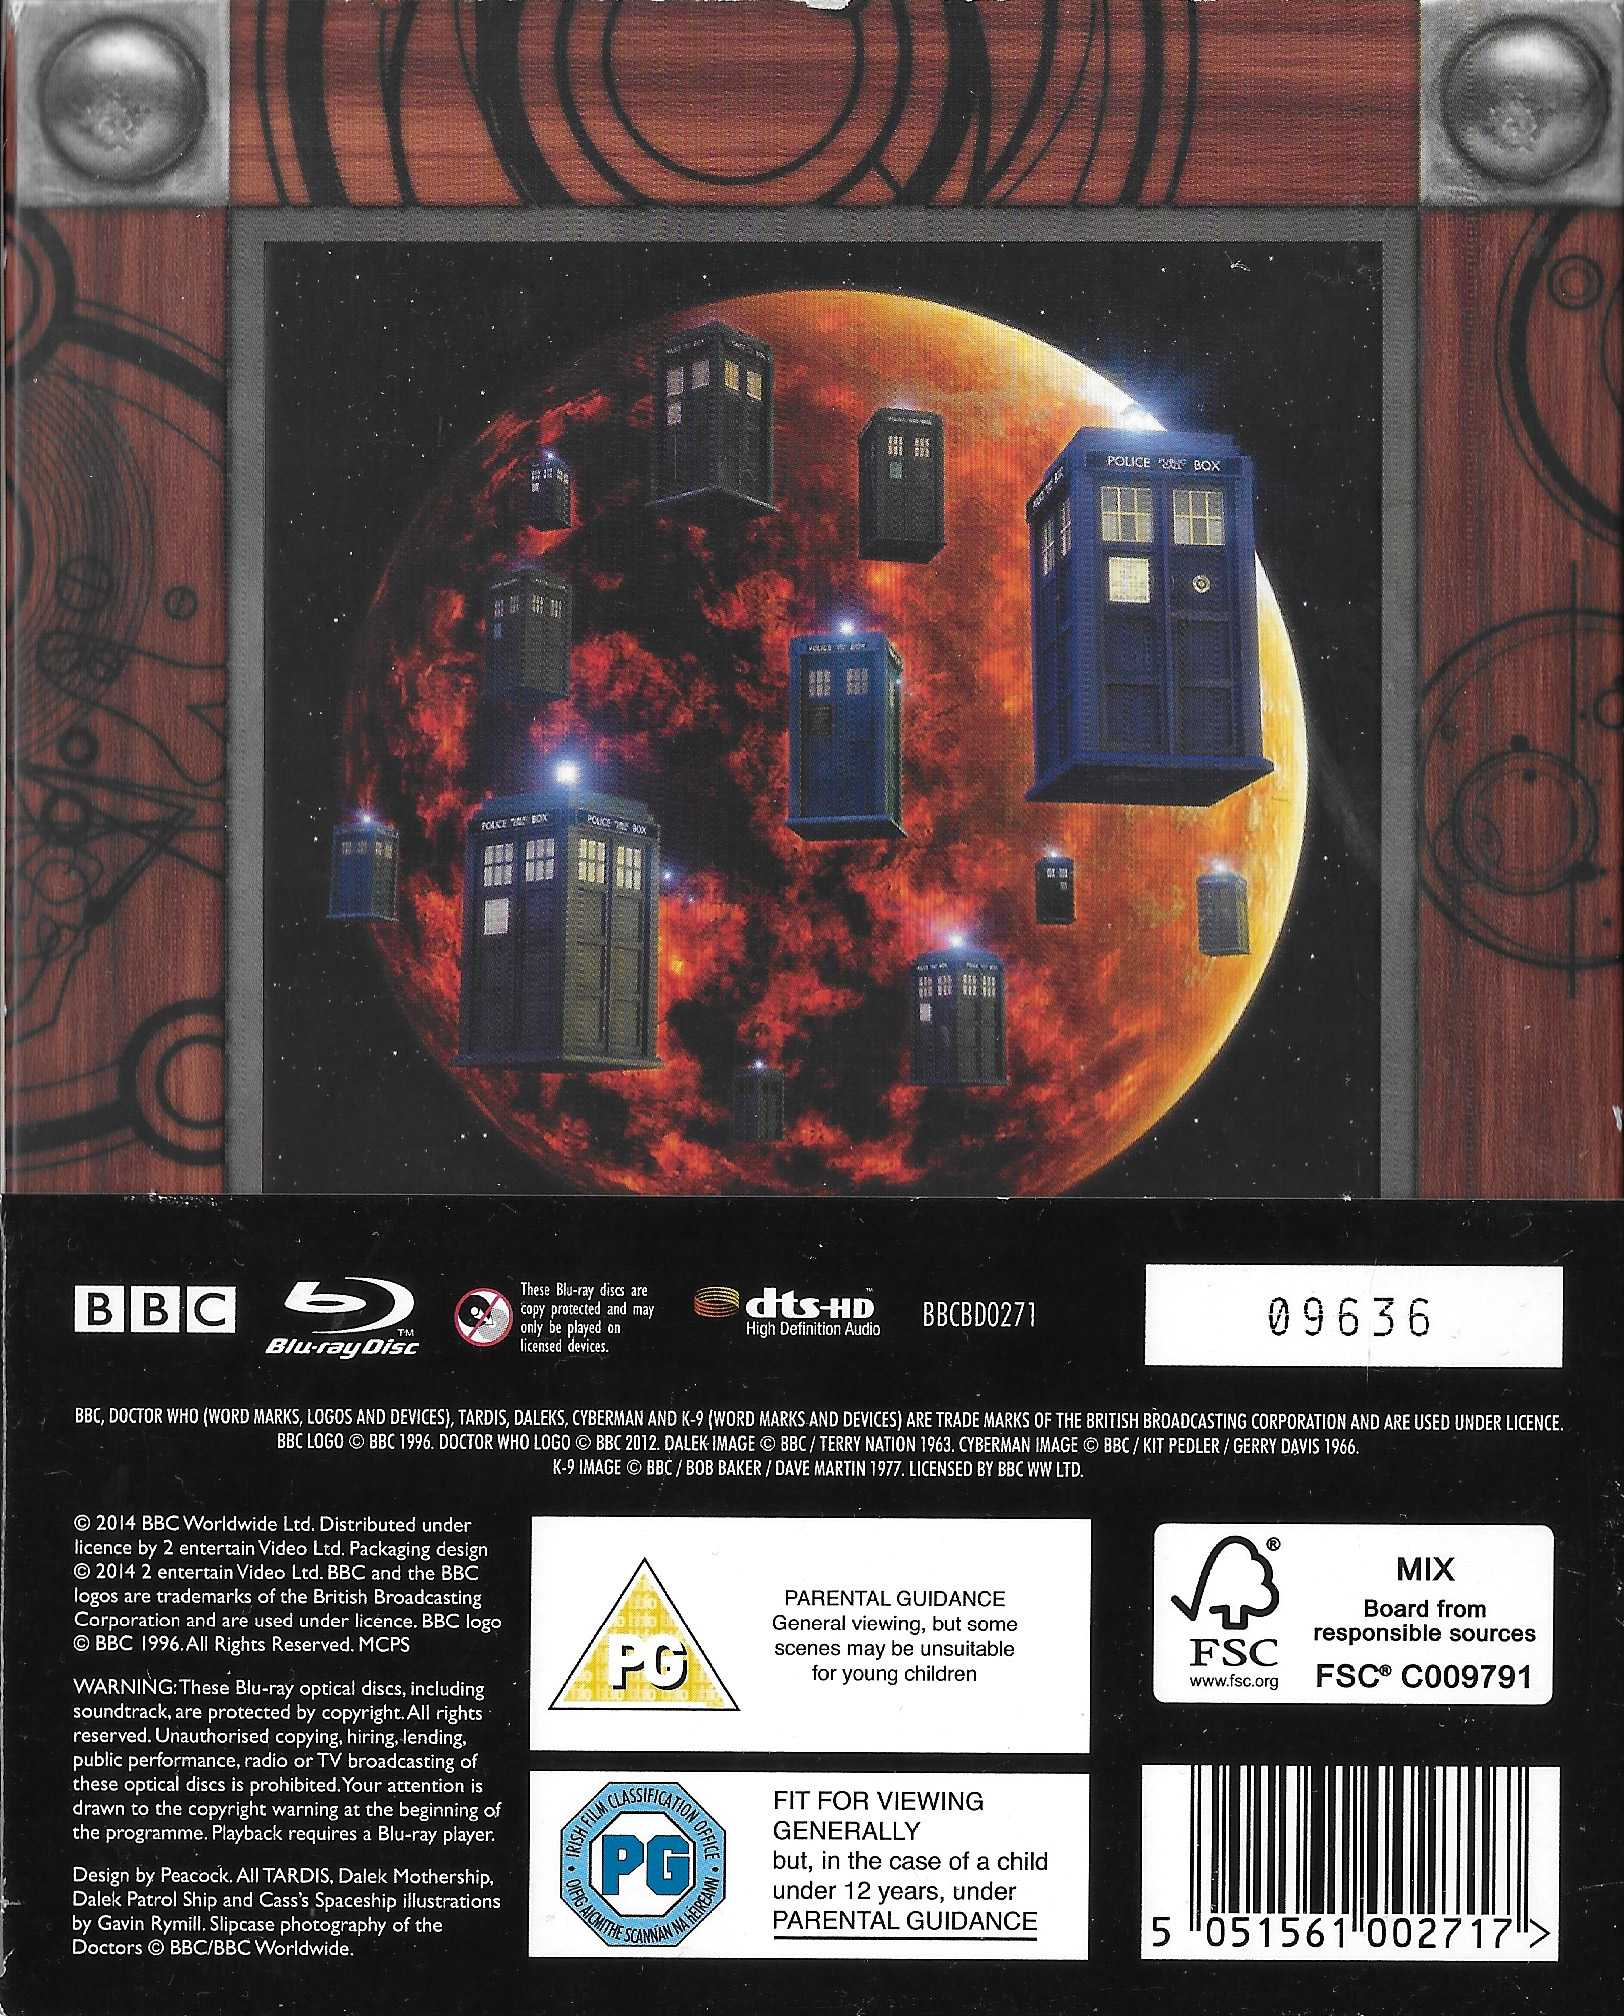 Picture of BBCBD 0271 Doctor Who - 50th anniversary collector's edition by artist Steven Moffat / Mark Gatiss from the BBC records and Tapes library